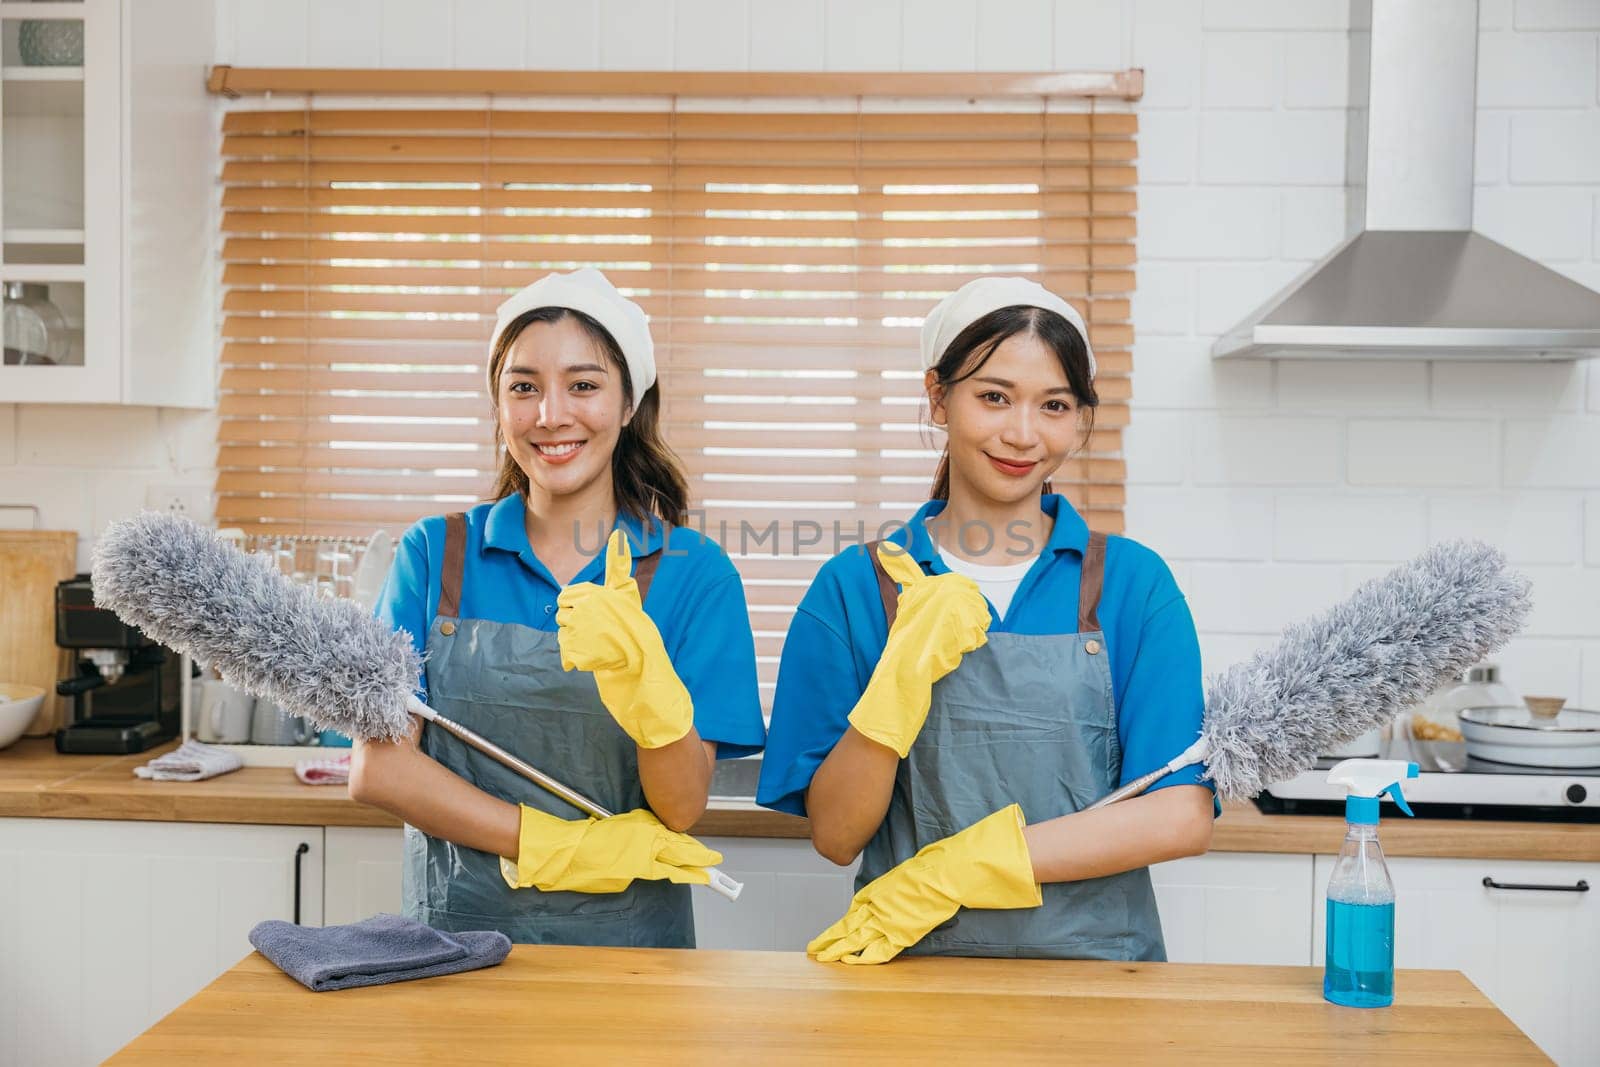 Portrait of two Asian housekeepers on kitchen counter with duster foggy spray and rag. Reflecting efficient housework teamwork and hygiene. Clean portrait two uniform maid working smiling employee. by Sorapop